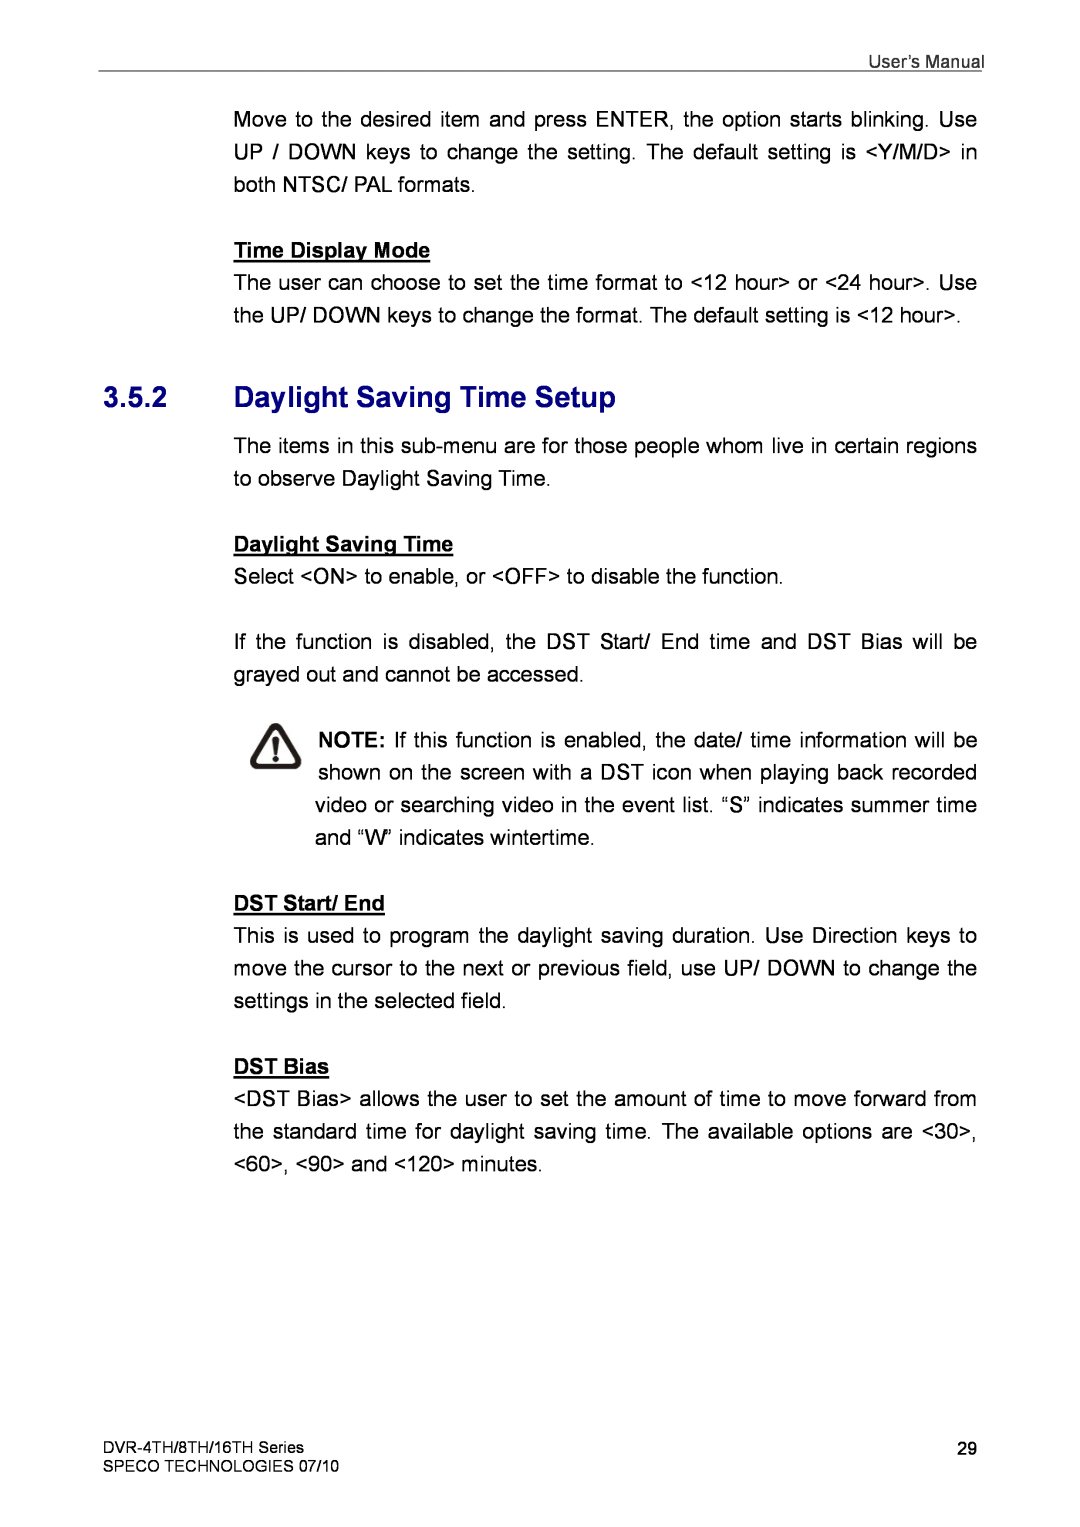 Speco Technologies 8TH, 4TH, 16TH user manual Daylight Saving Time Setup, Time Display Mode, DST Start/ End, DST Bias 